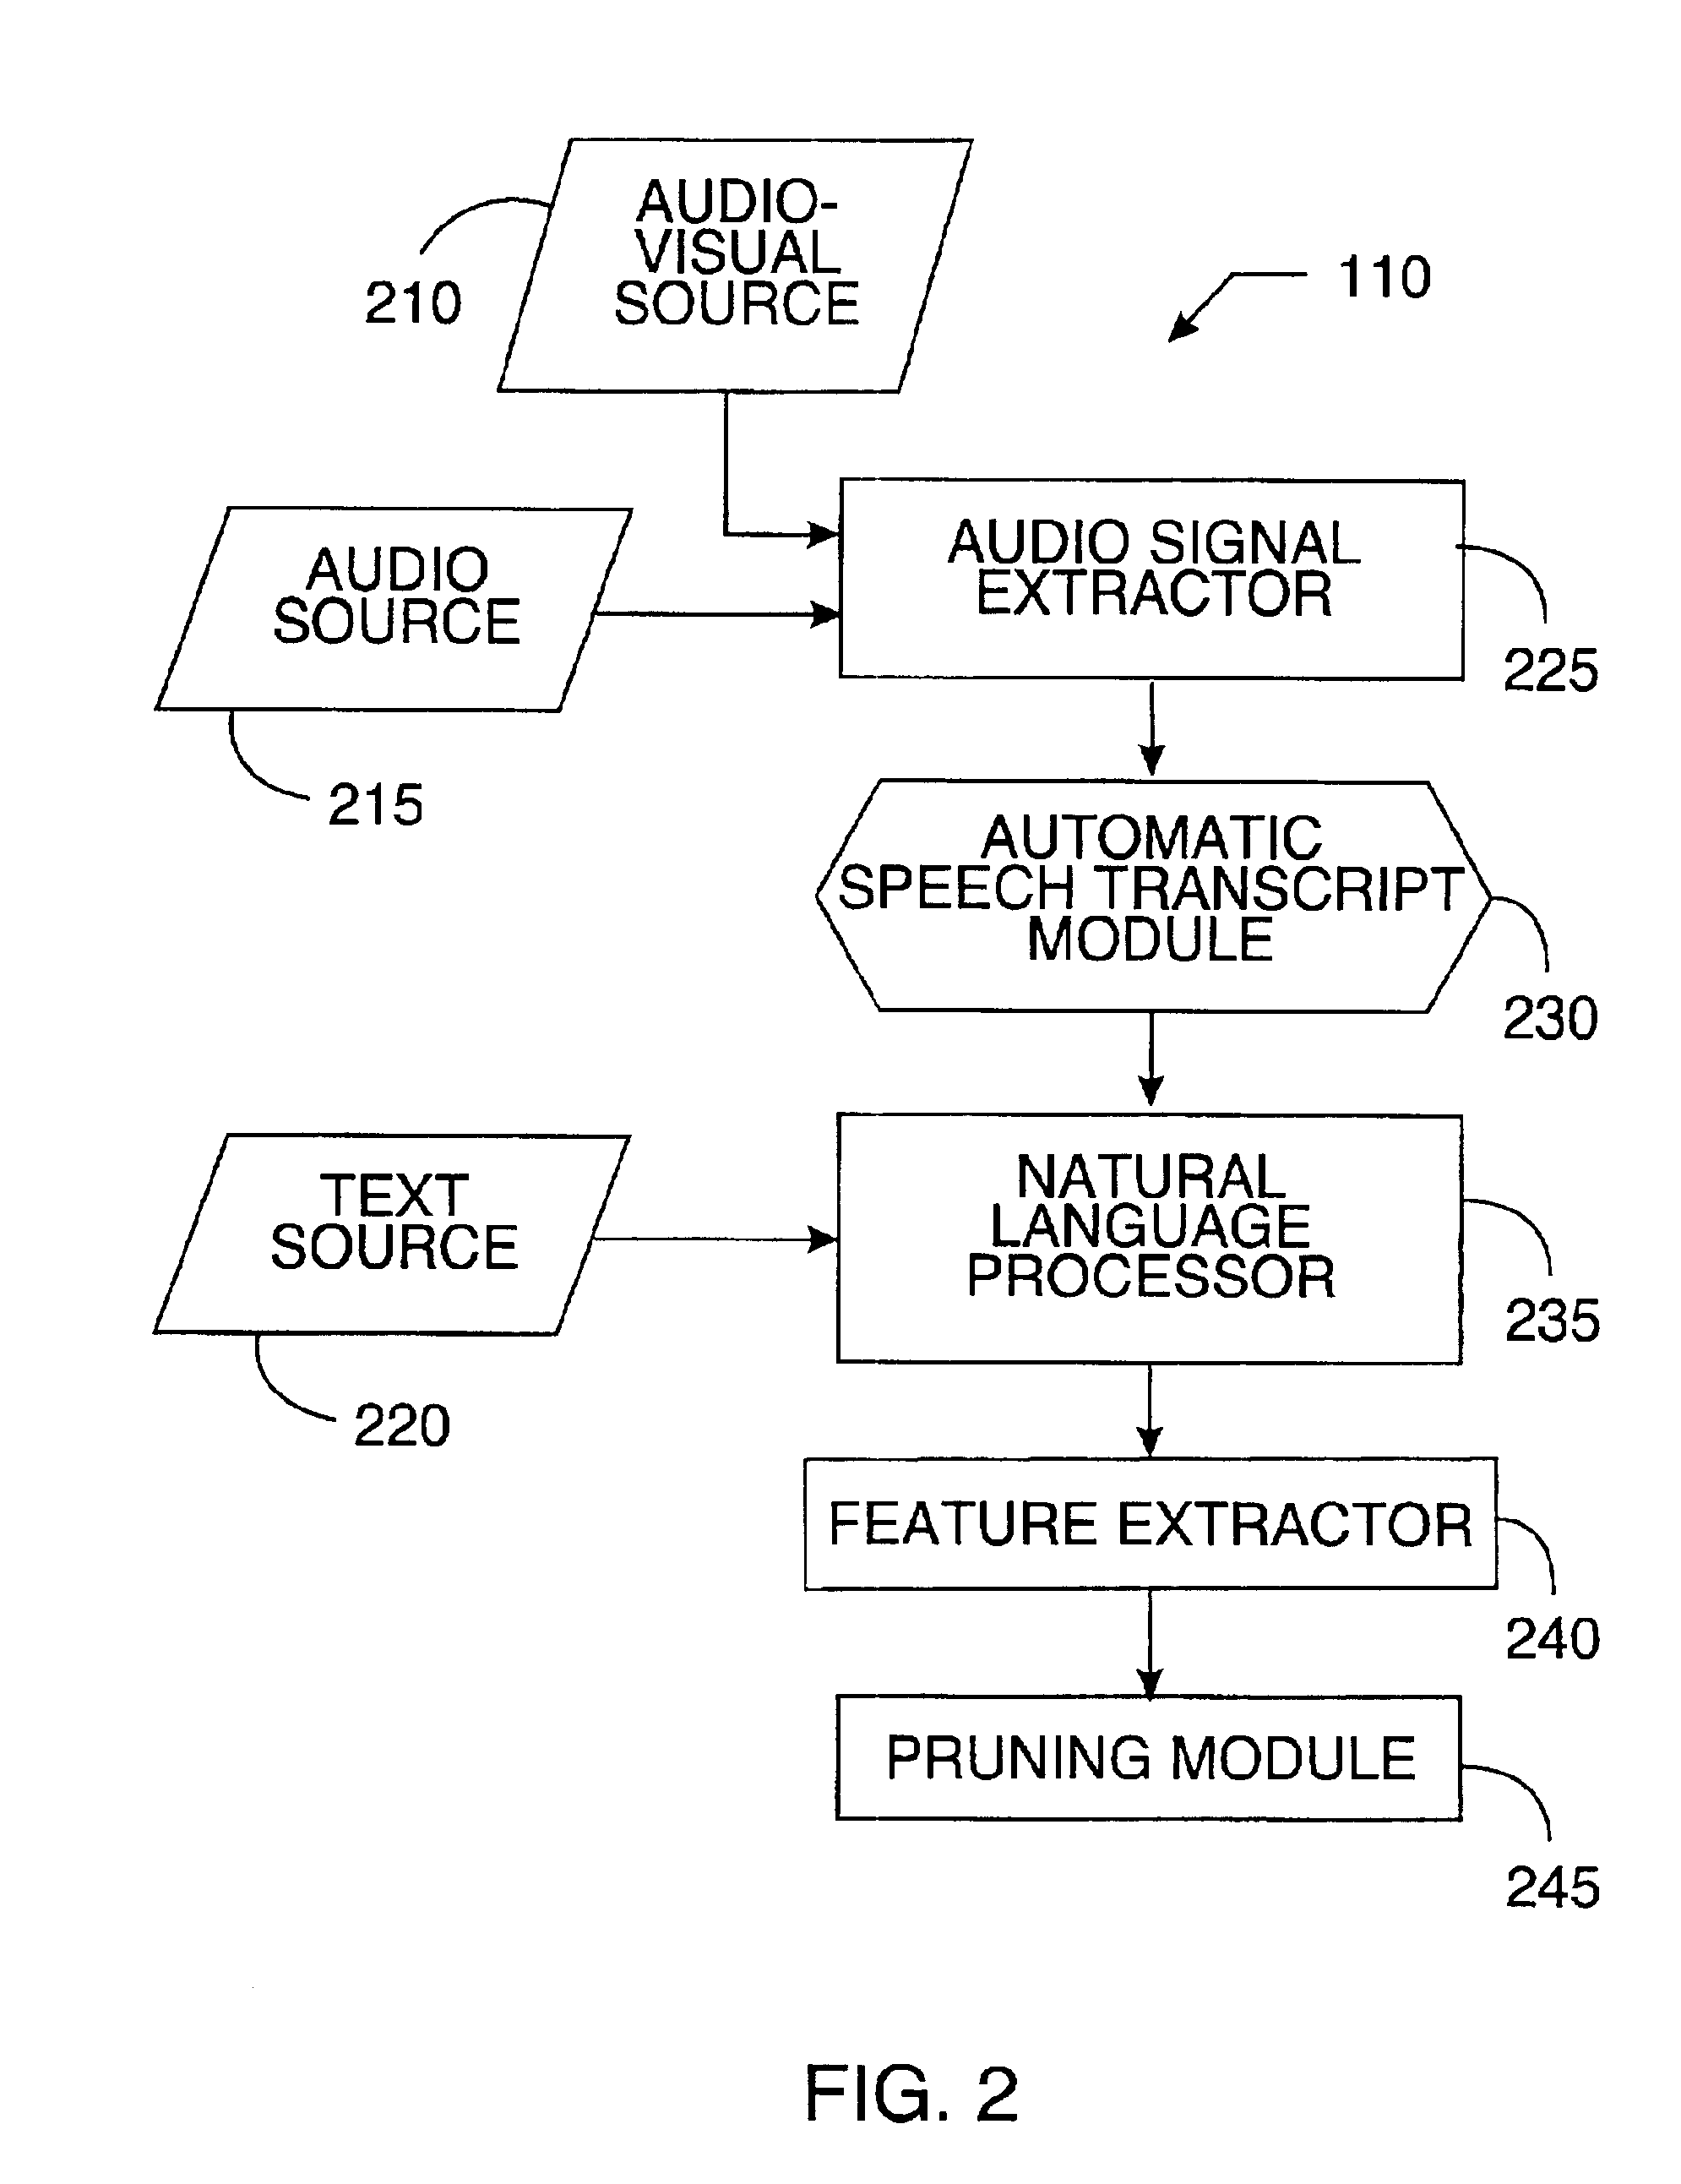 System and method for the automatic discovery of salient segments in speech transcripts